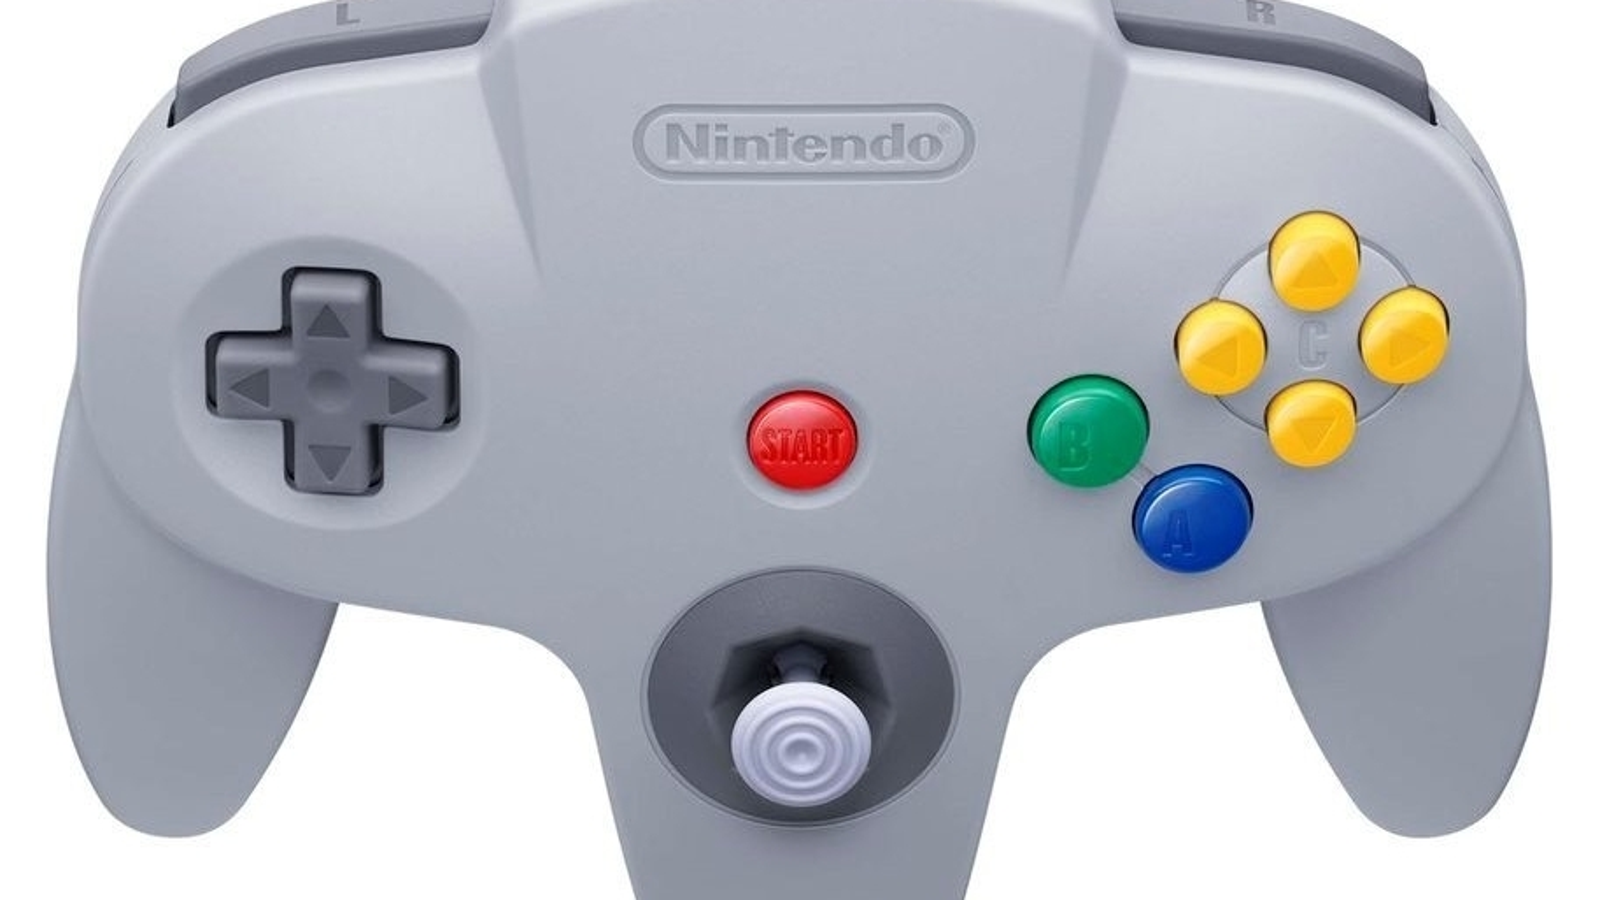 Nintendo Switch Online datamine points to at least 38 N64 games